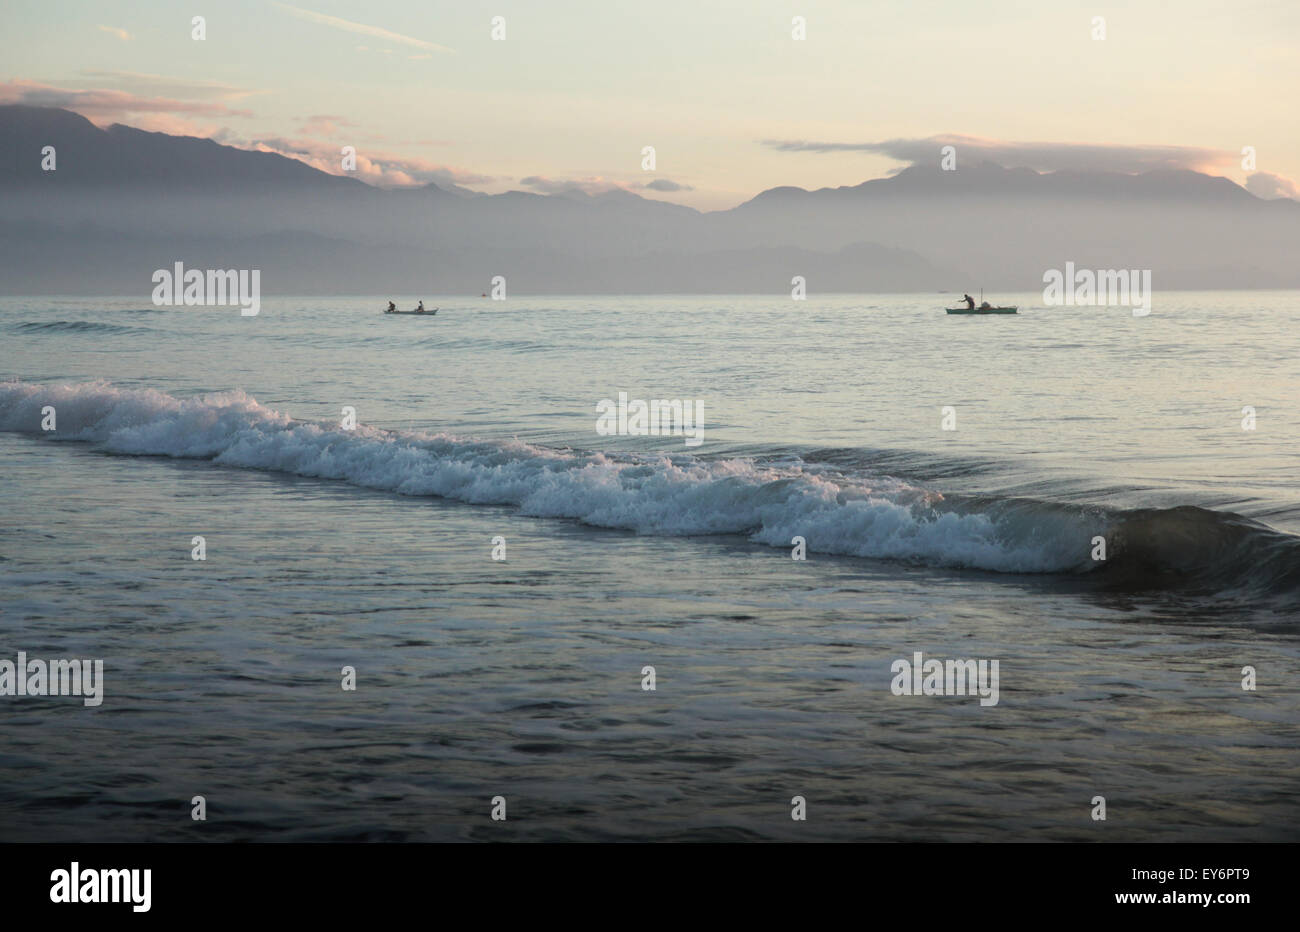 Local fishermen by Sabang Beach, Baler in the Philippines. Stock Photo